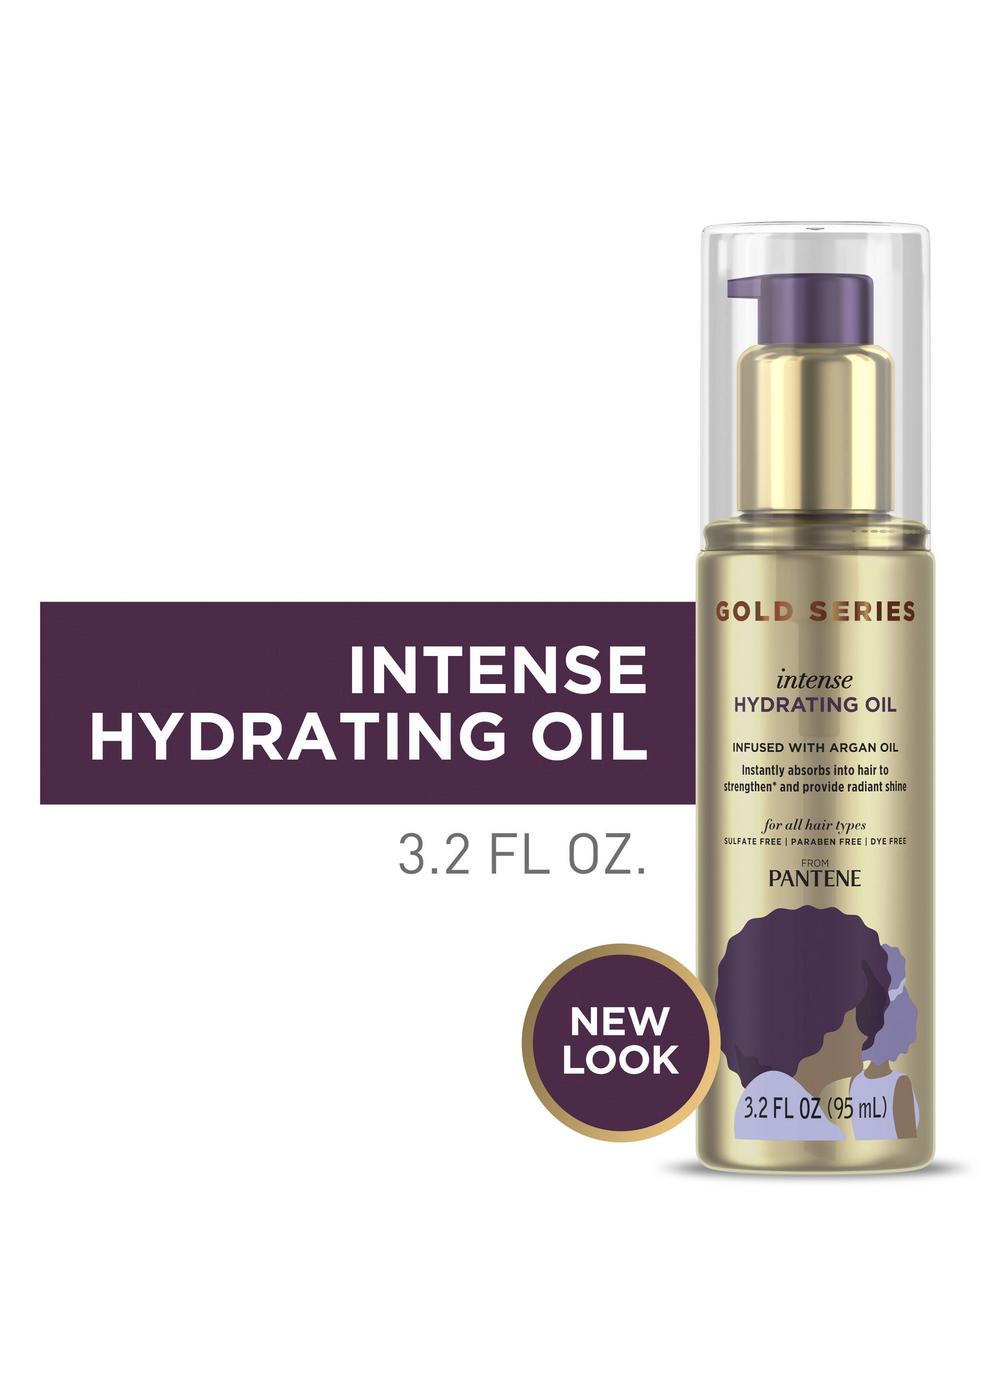 Pantene Gold Series Intense Hydrating Oil Treatment; image 9 of 9